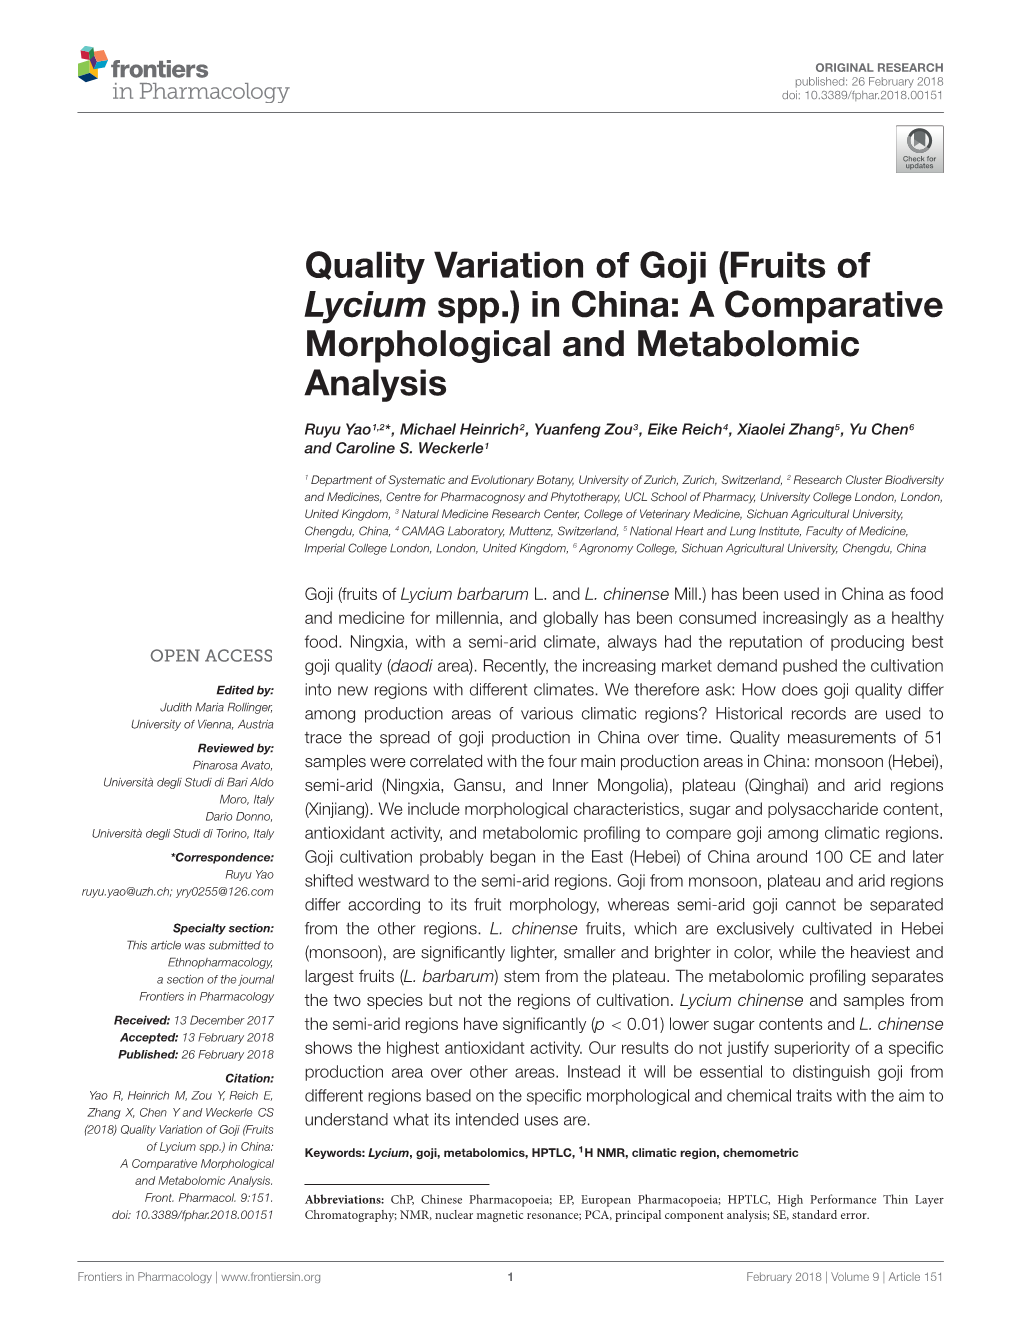 Quality Variation of Goji (Fruits of Lycium Spp.) in China: a Comparative Morphological and Metabolomic Analysis